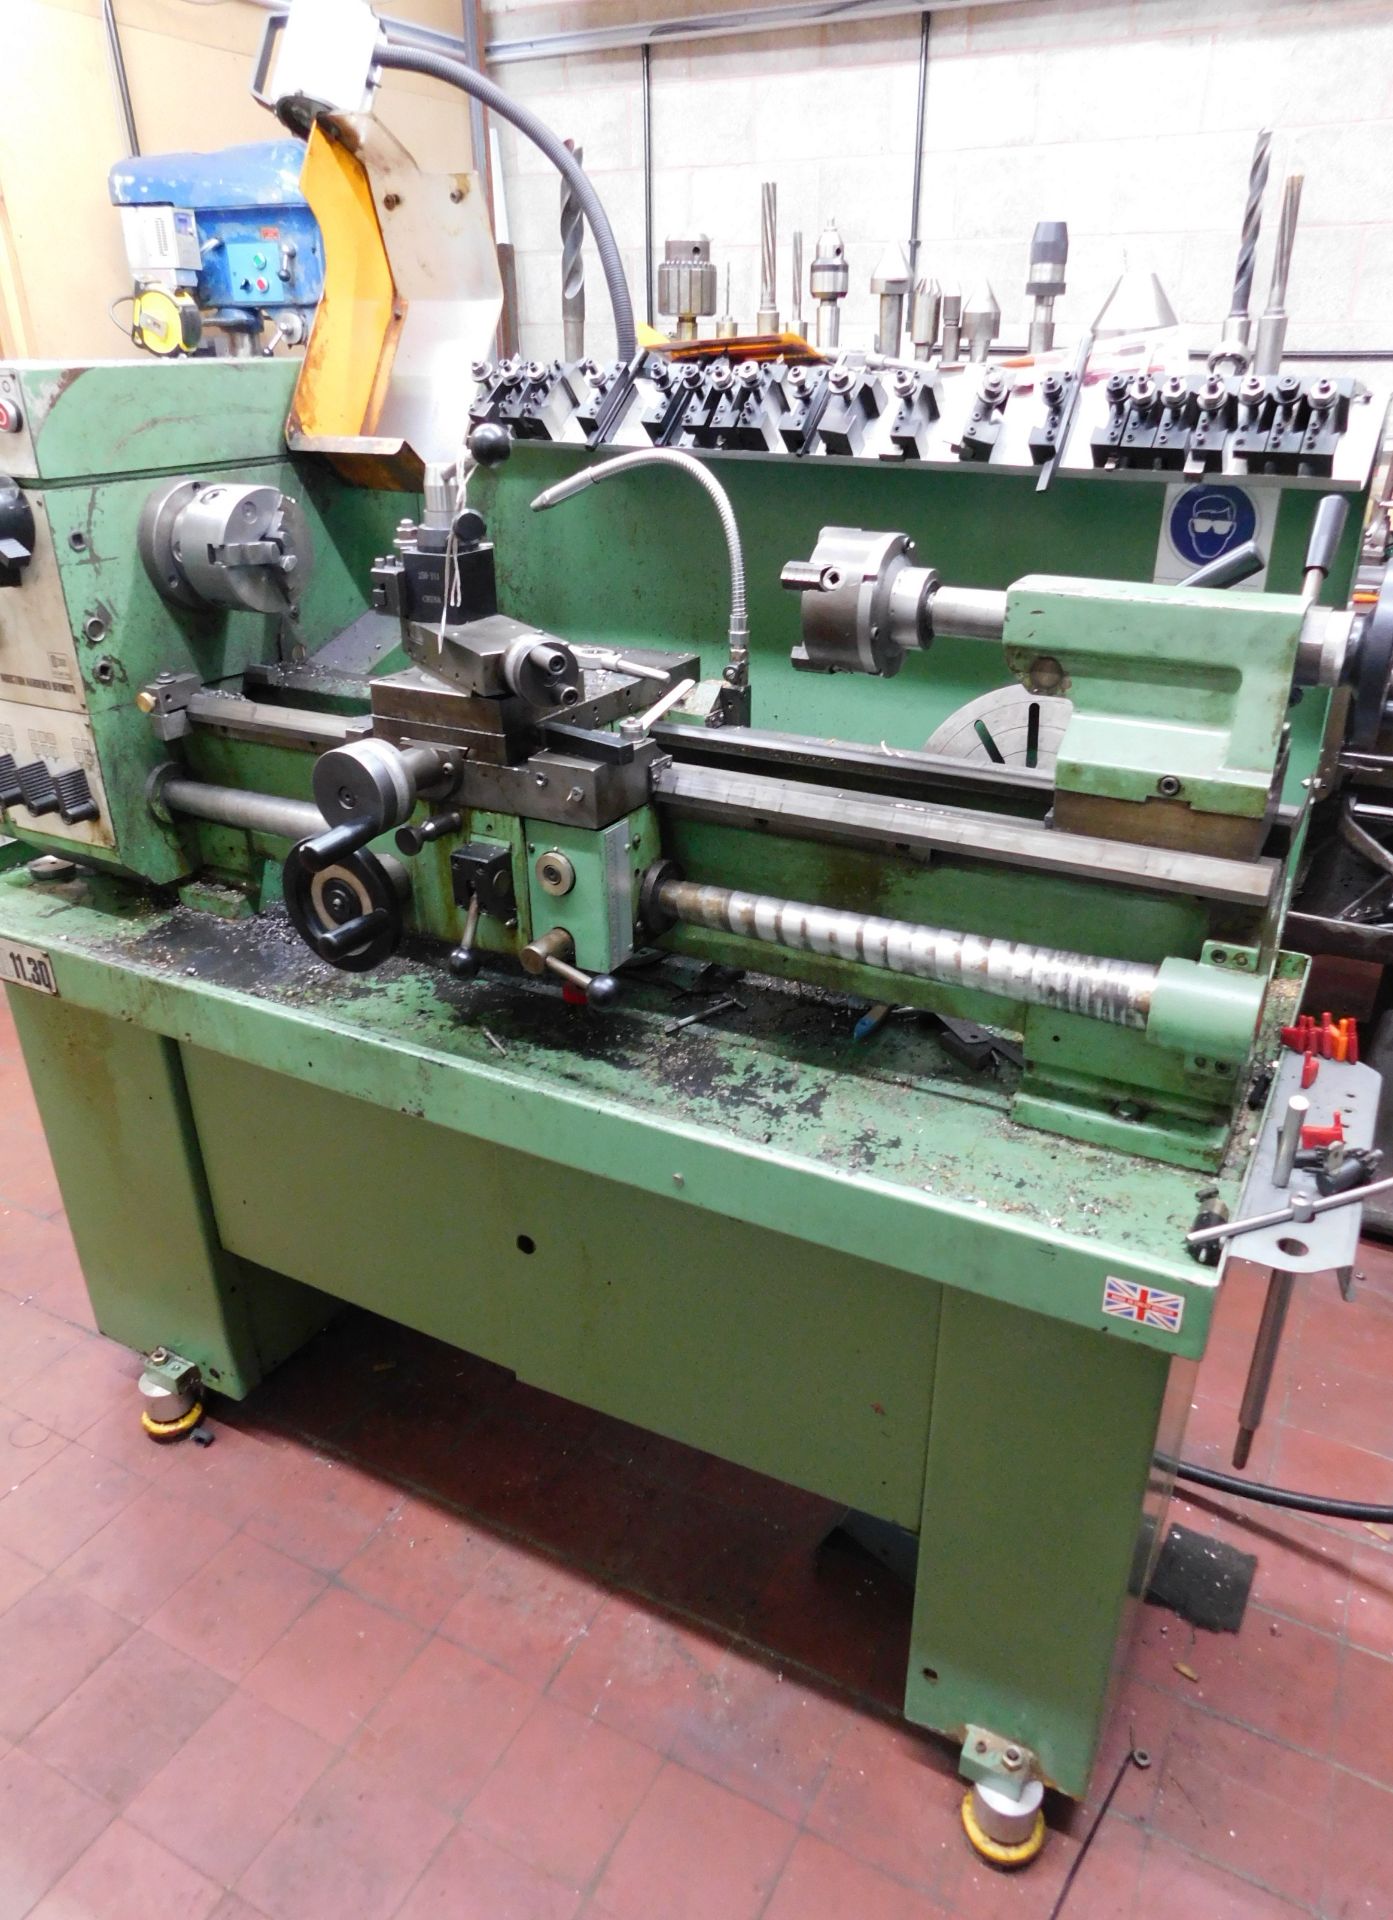 Boxford Industrial 11.30 Gap Bed Lathe, 43in Bed (Location: Bolton. Please Refer to General Notes) - Image 3 of 9